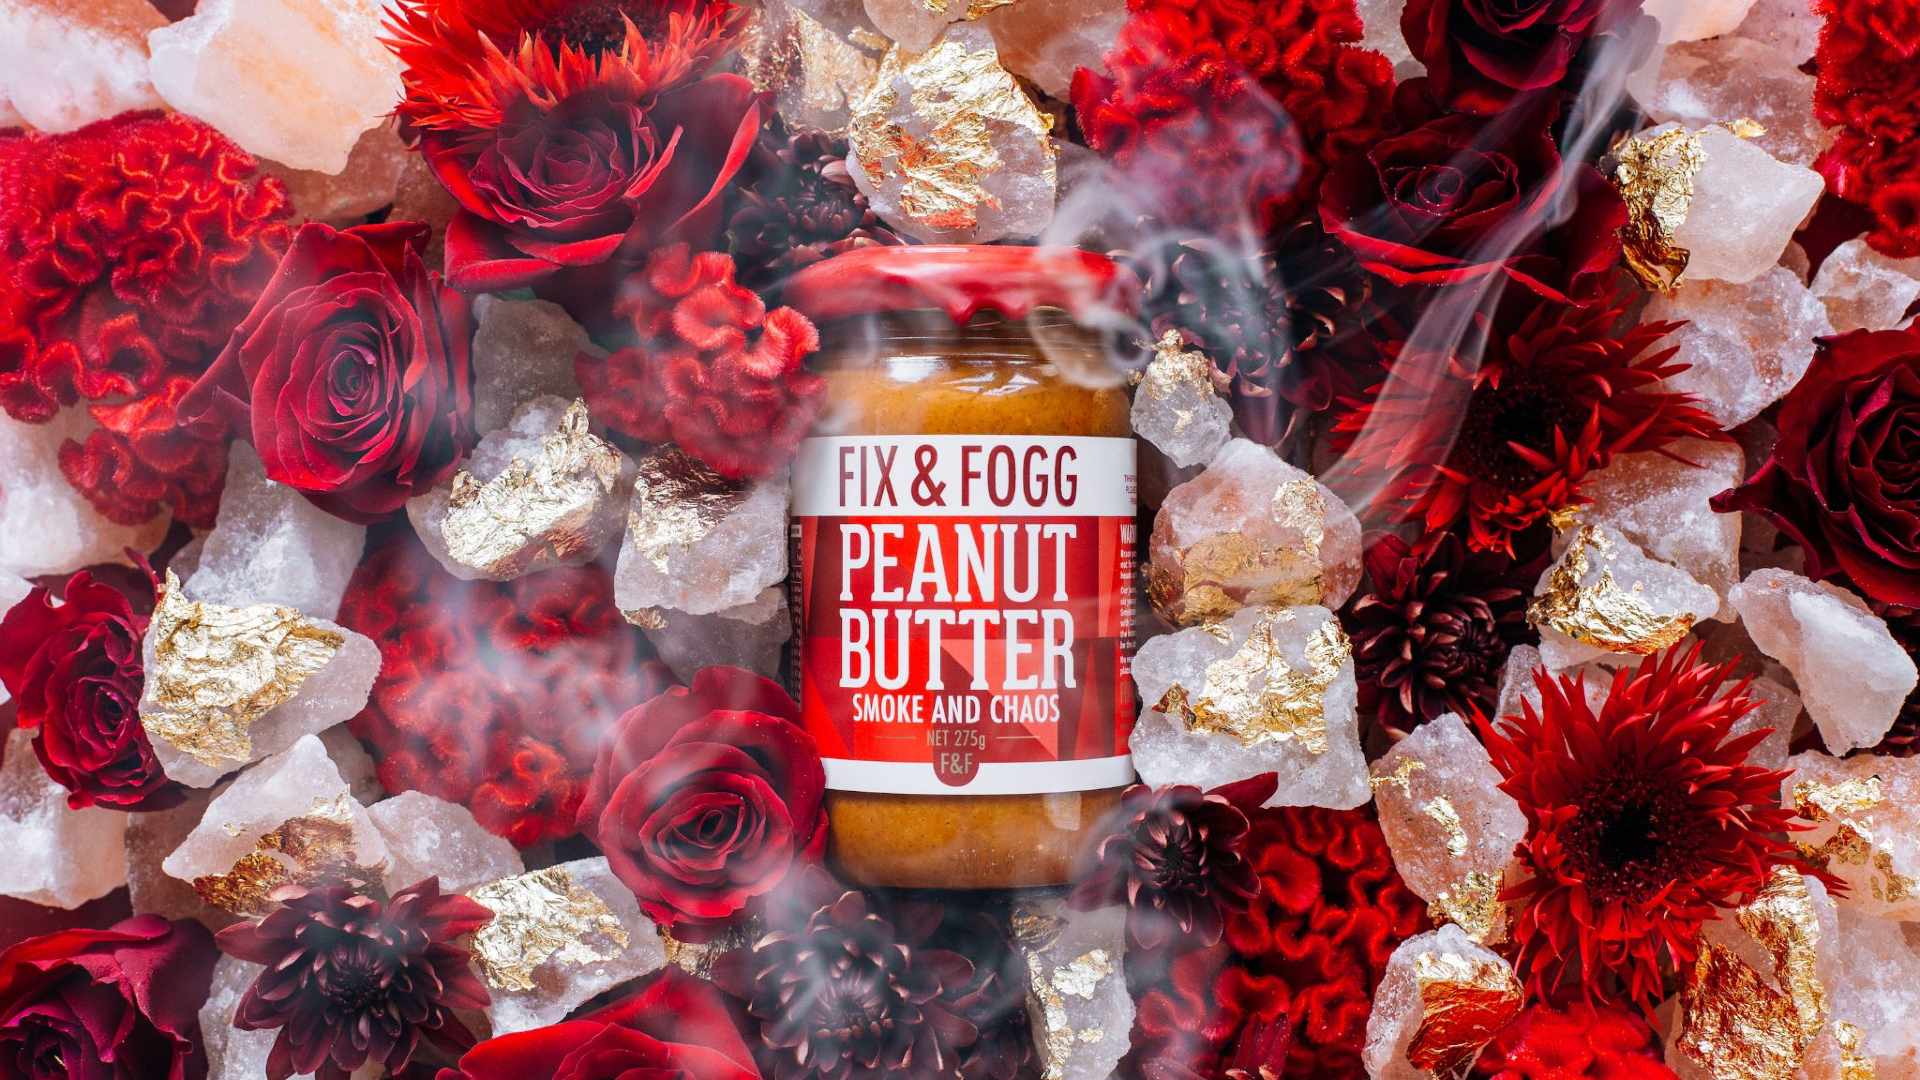 Fix and Fogg Say Their New 'Smoke and Chaos' Peanut Butter Is the 